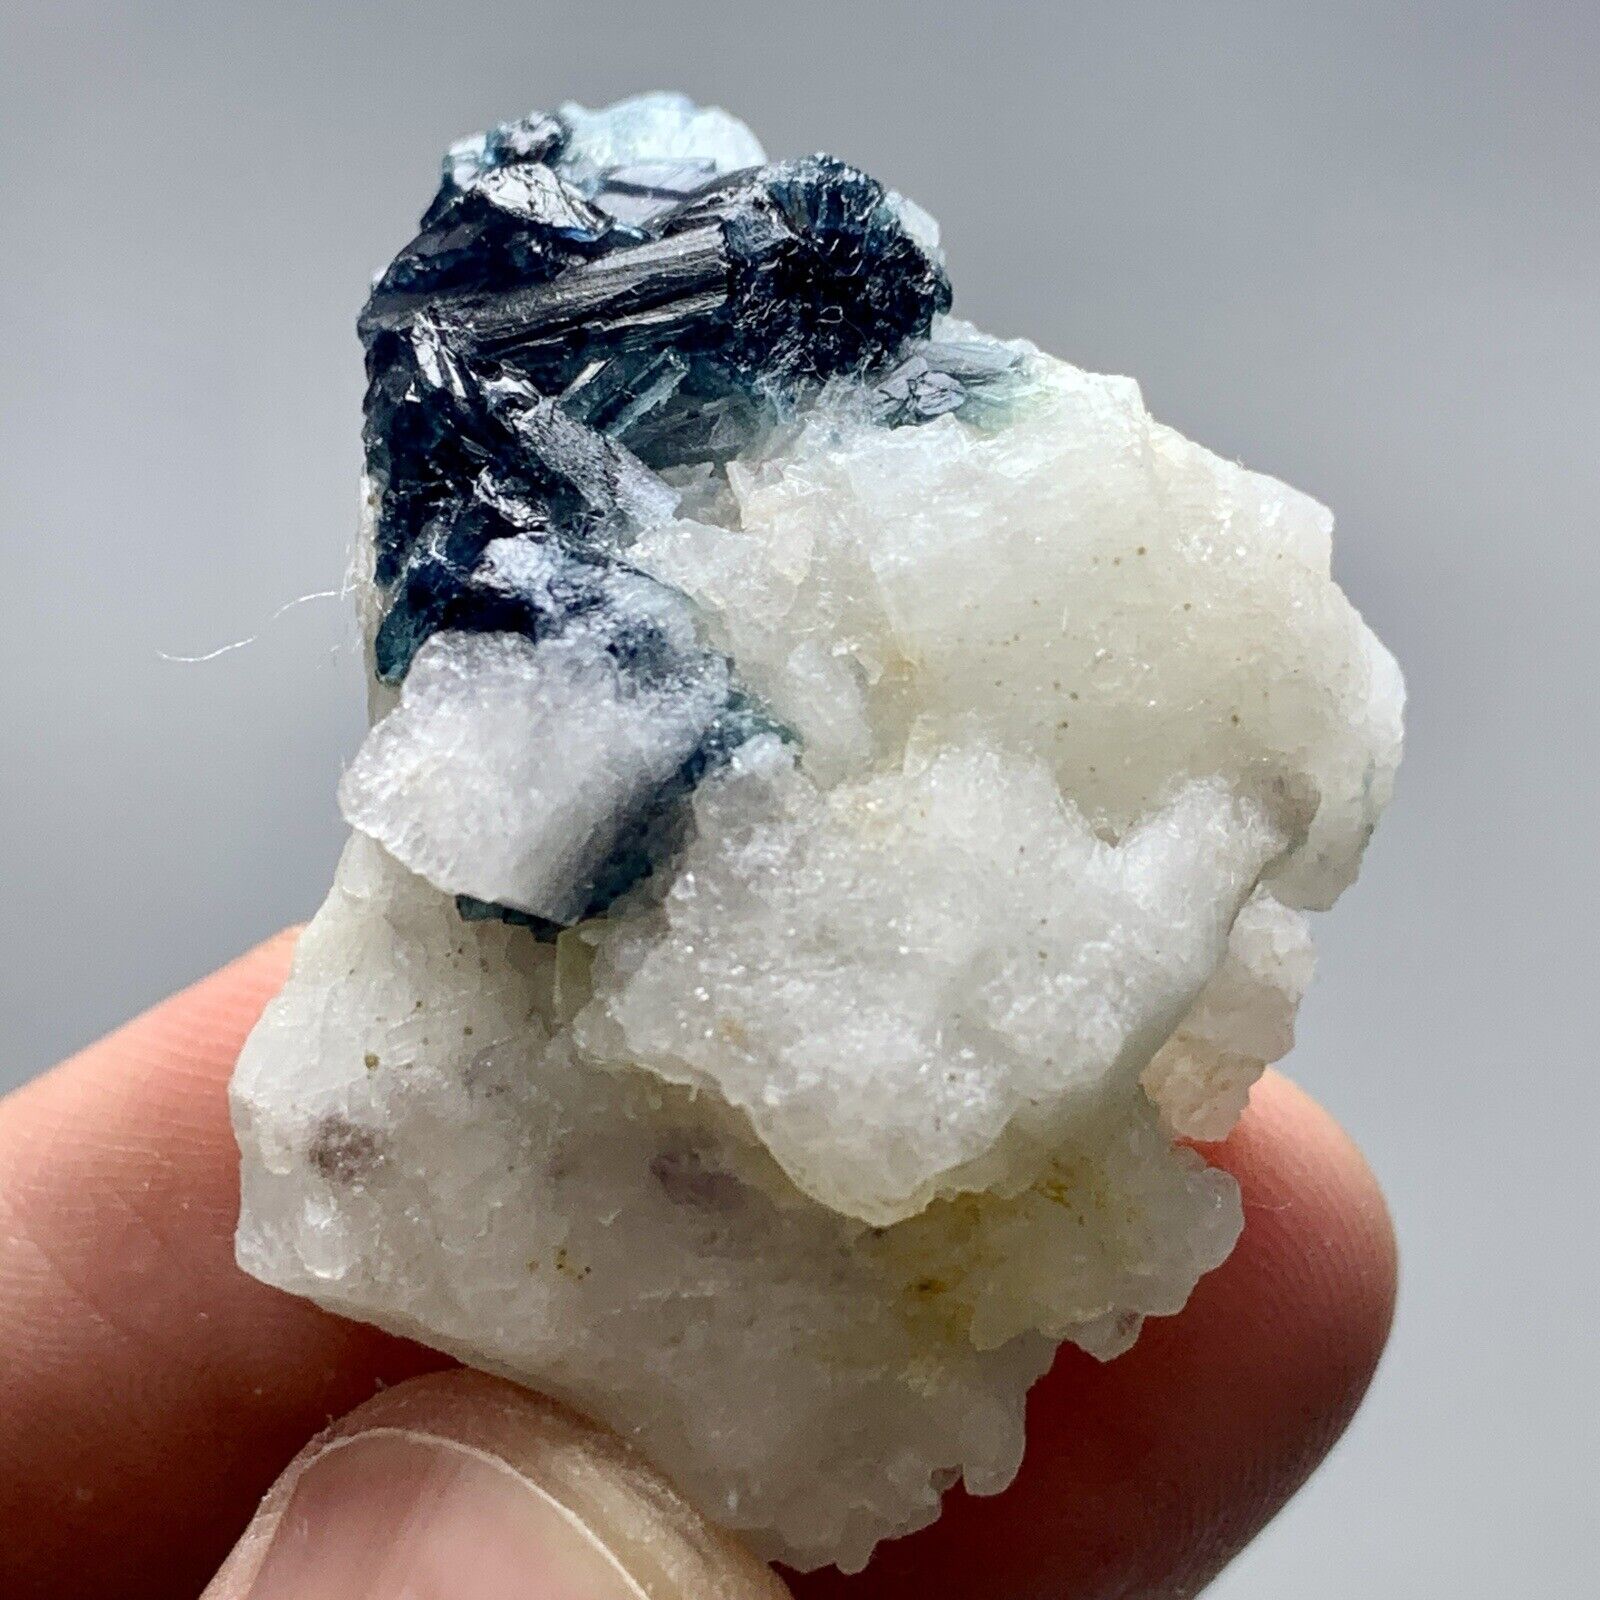 110 Carat Indicolite Tourmaline Crystal With Specimen From Afghanistan